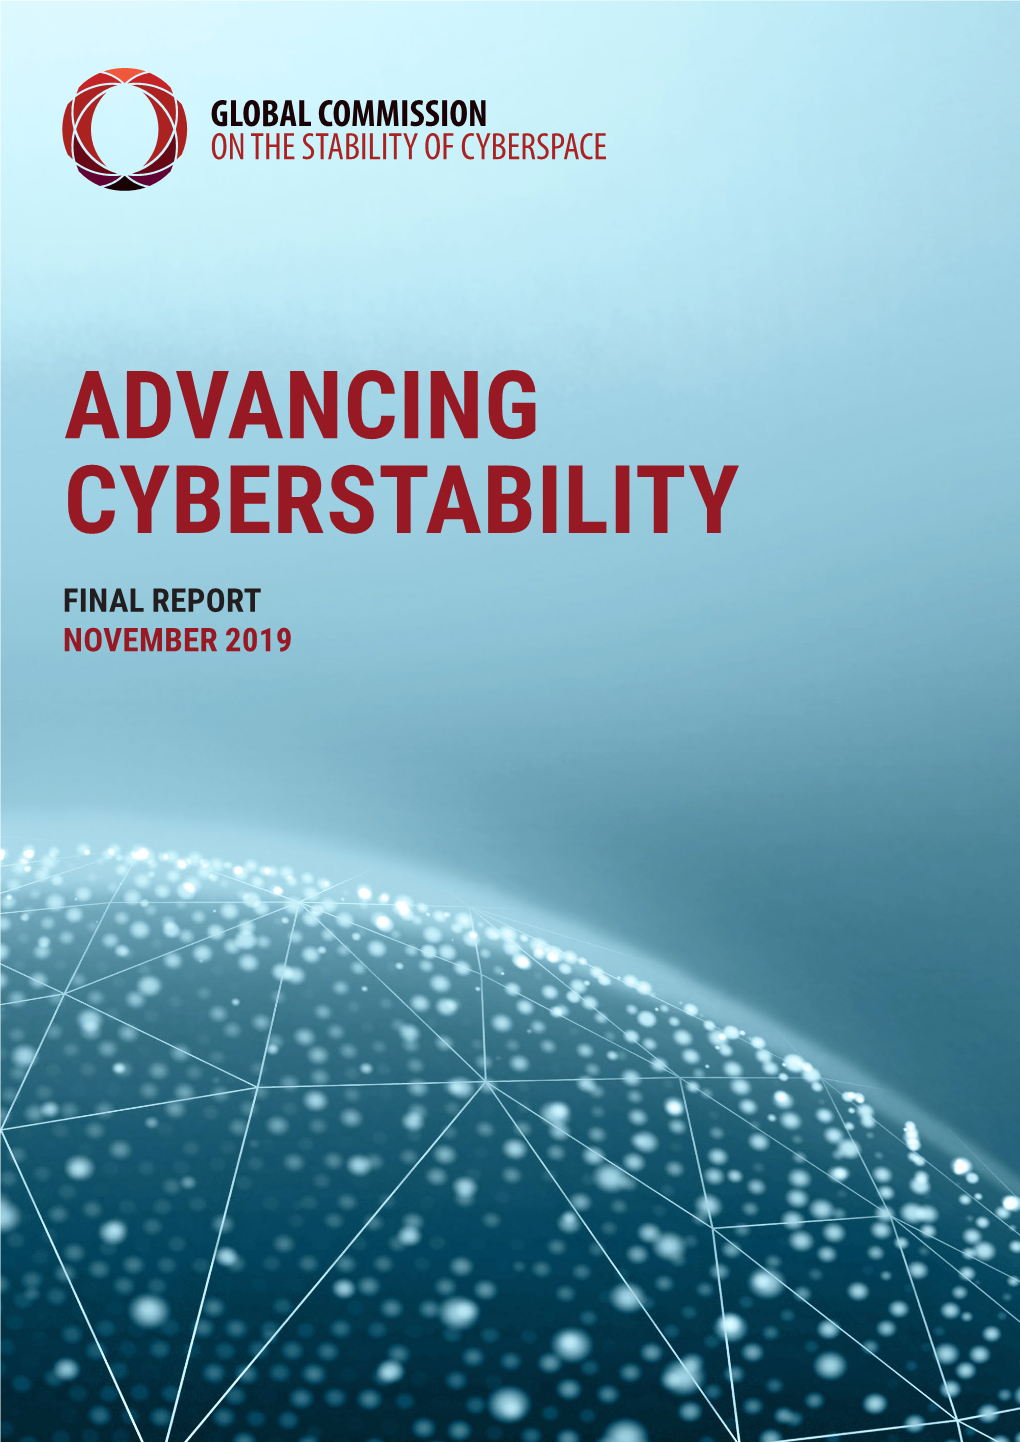 Advancing Cyberstability Final Report November 2019 Promoting Stability in Cyberspace to Build Peace and Prosperity